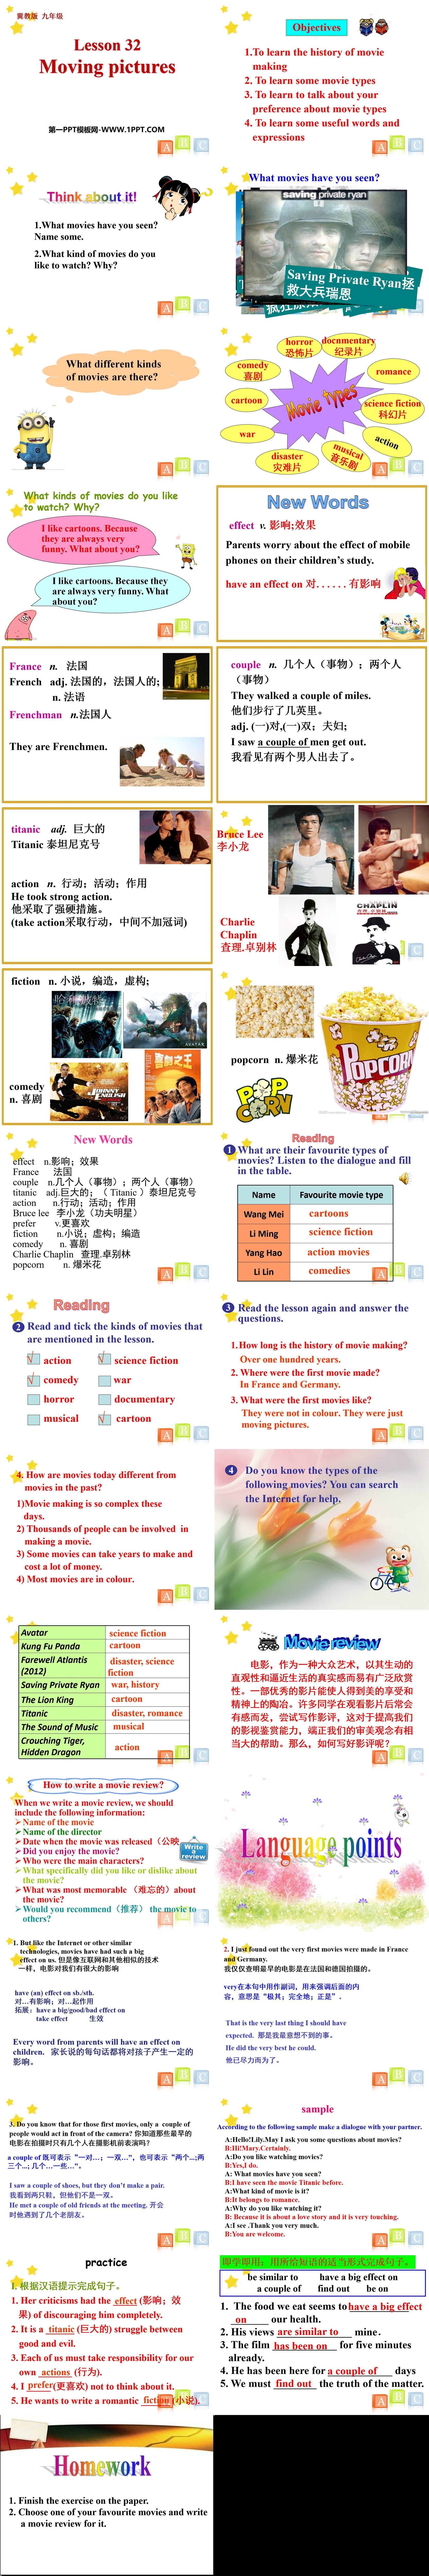 《Moving Pictures》Movies and Theatre PPT课件
（2）